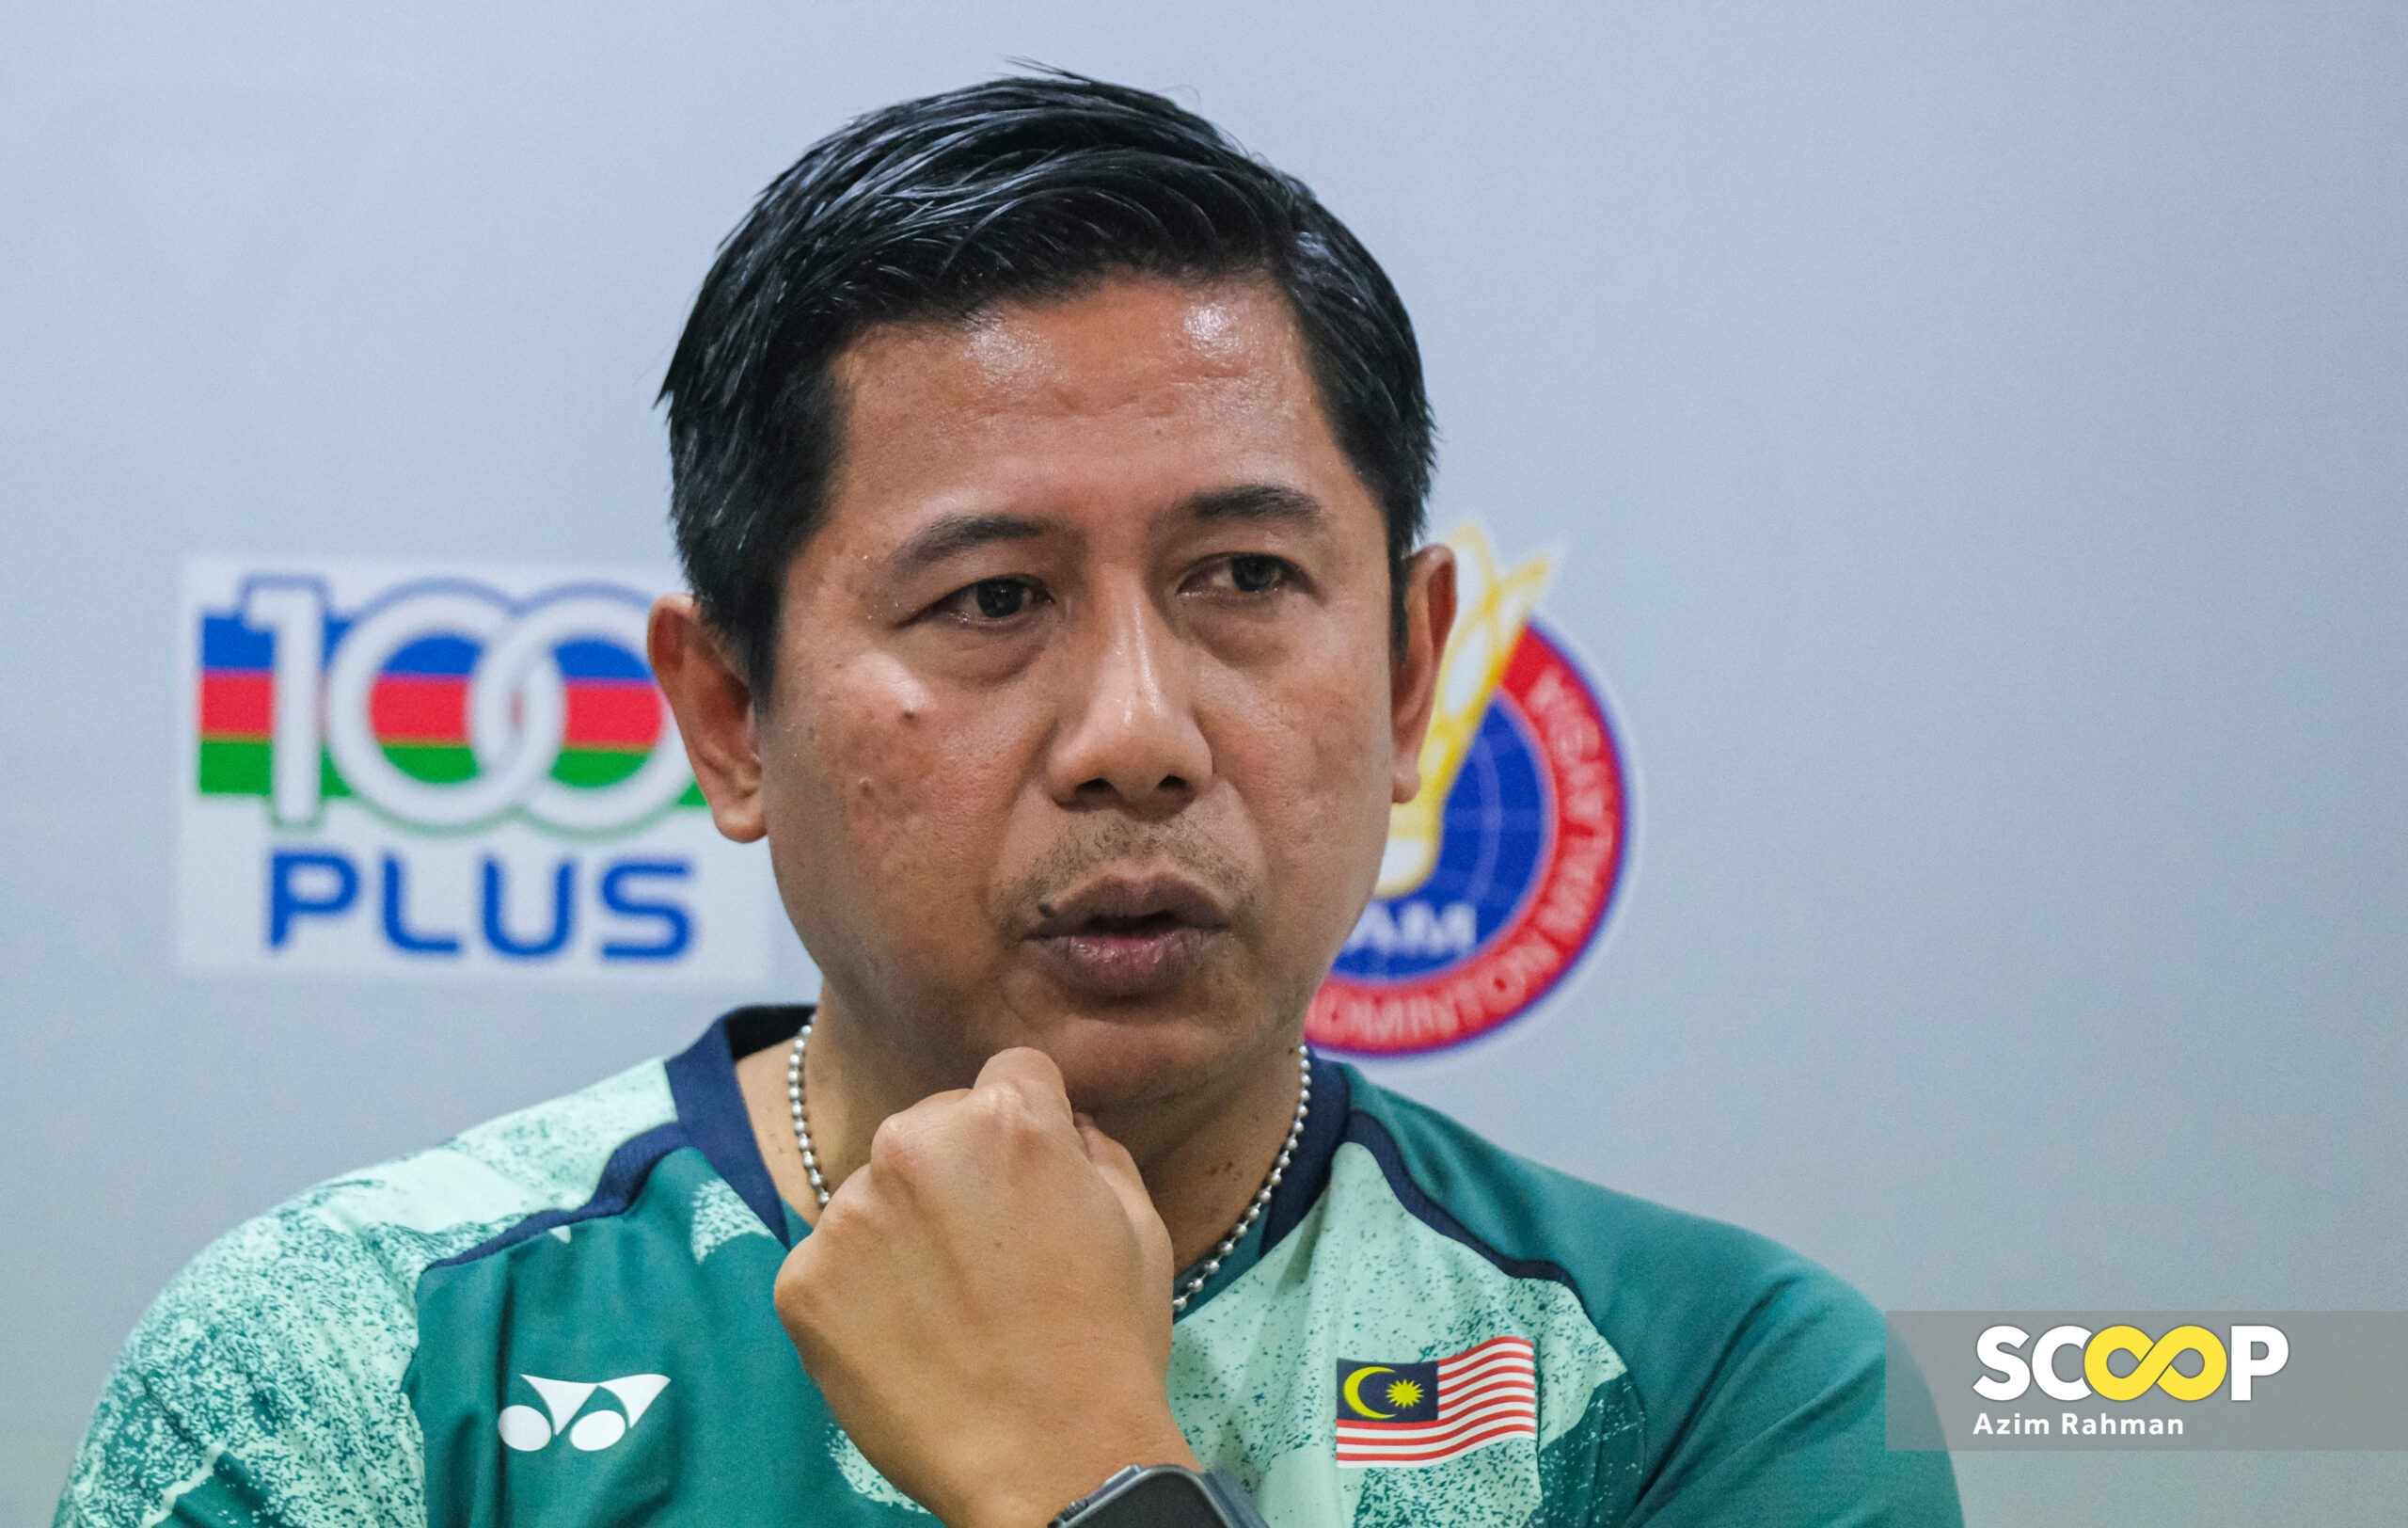 Forming mixed doubles hindered by shortage of female players, says coach Nova